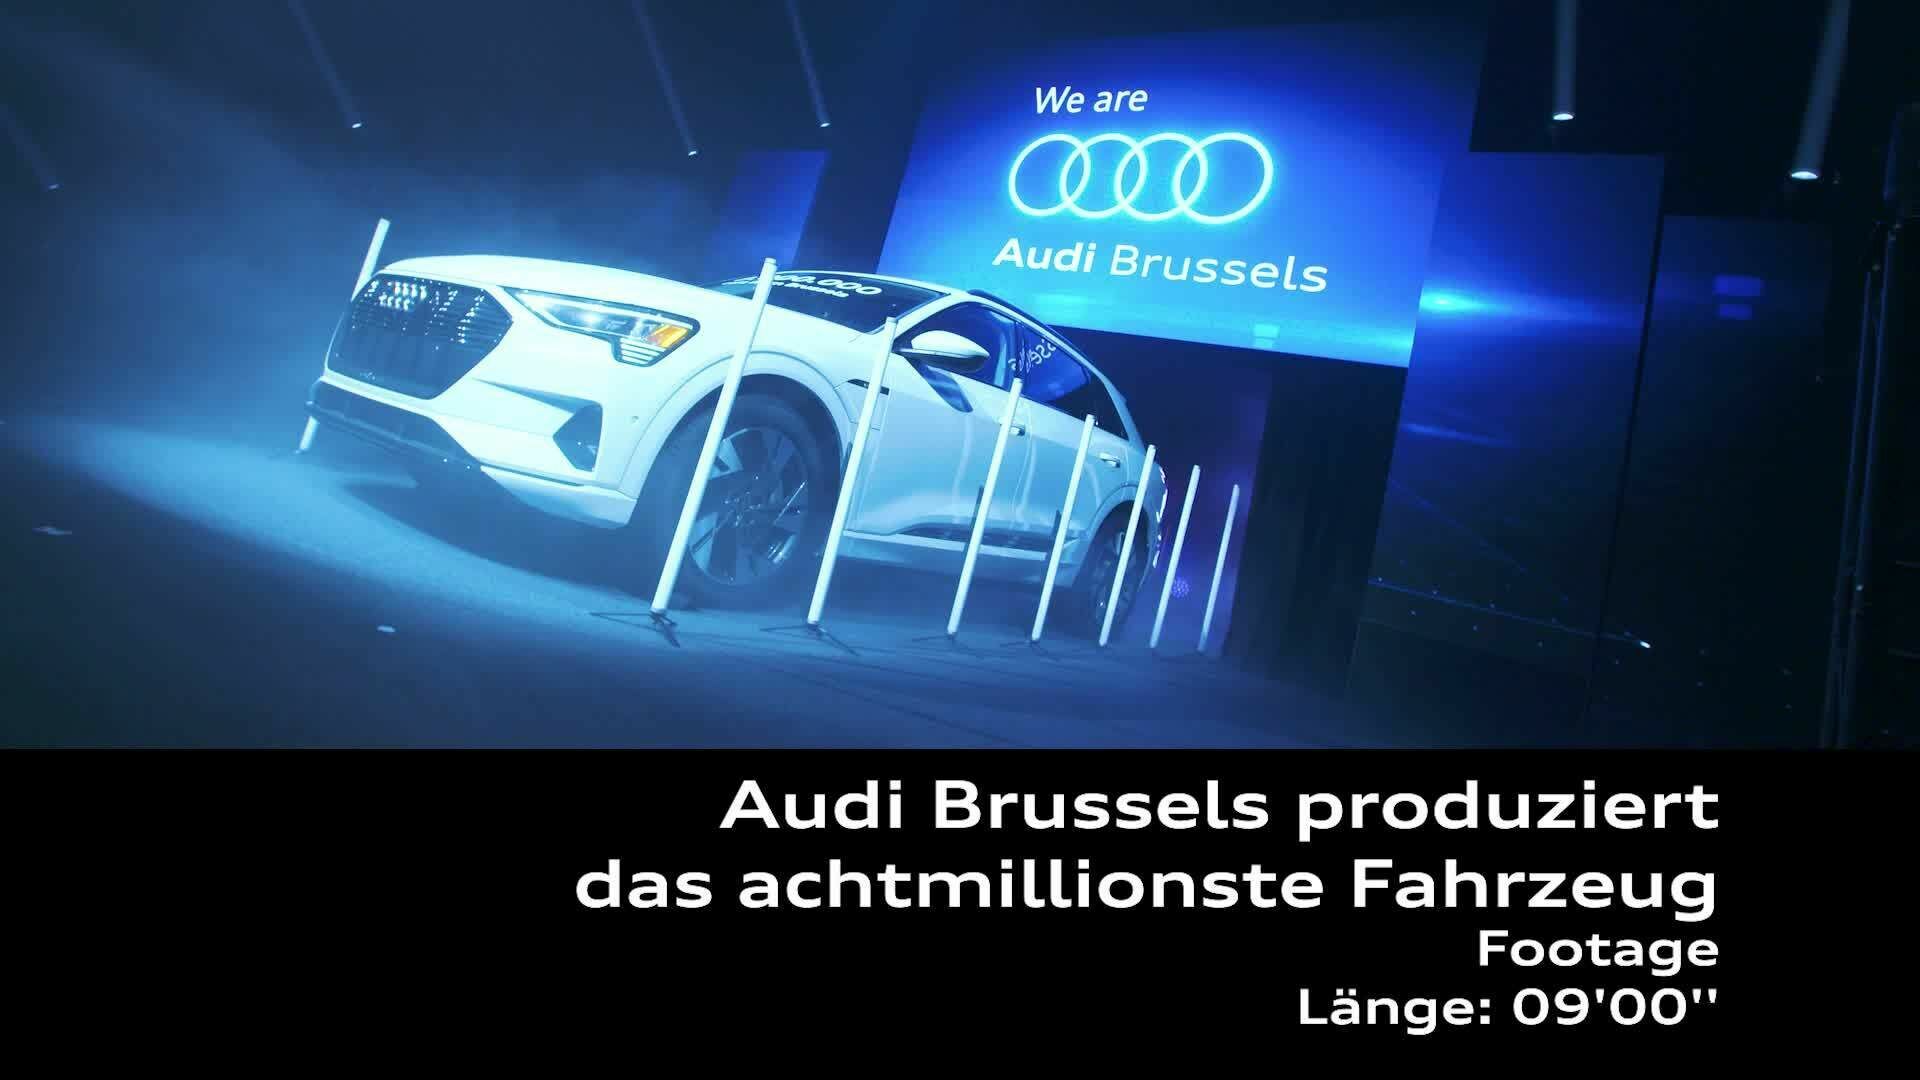 Footage: Audi Brussels manufactures its eight millionth car